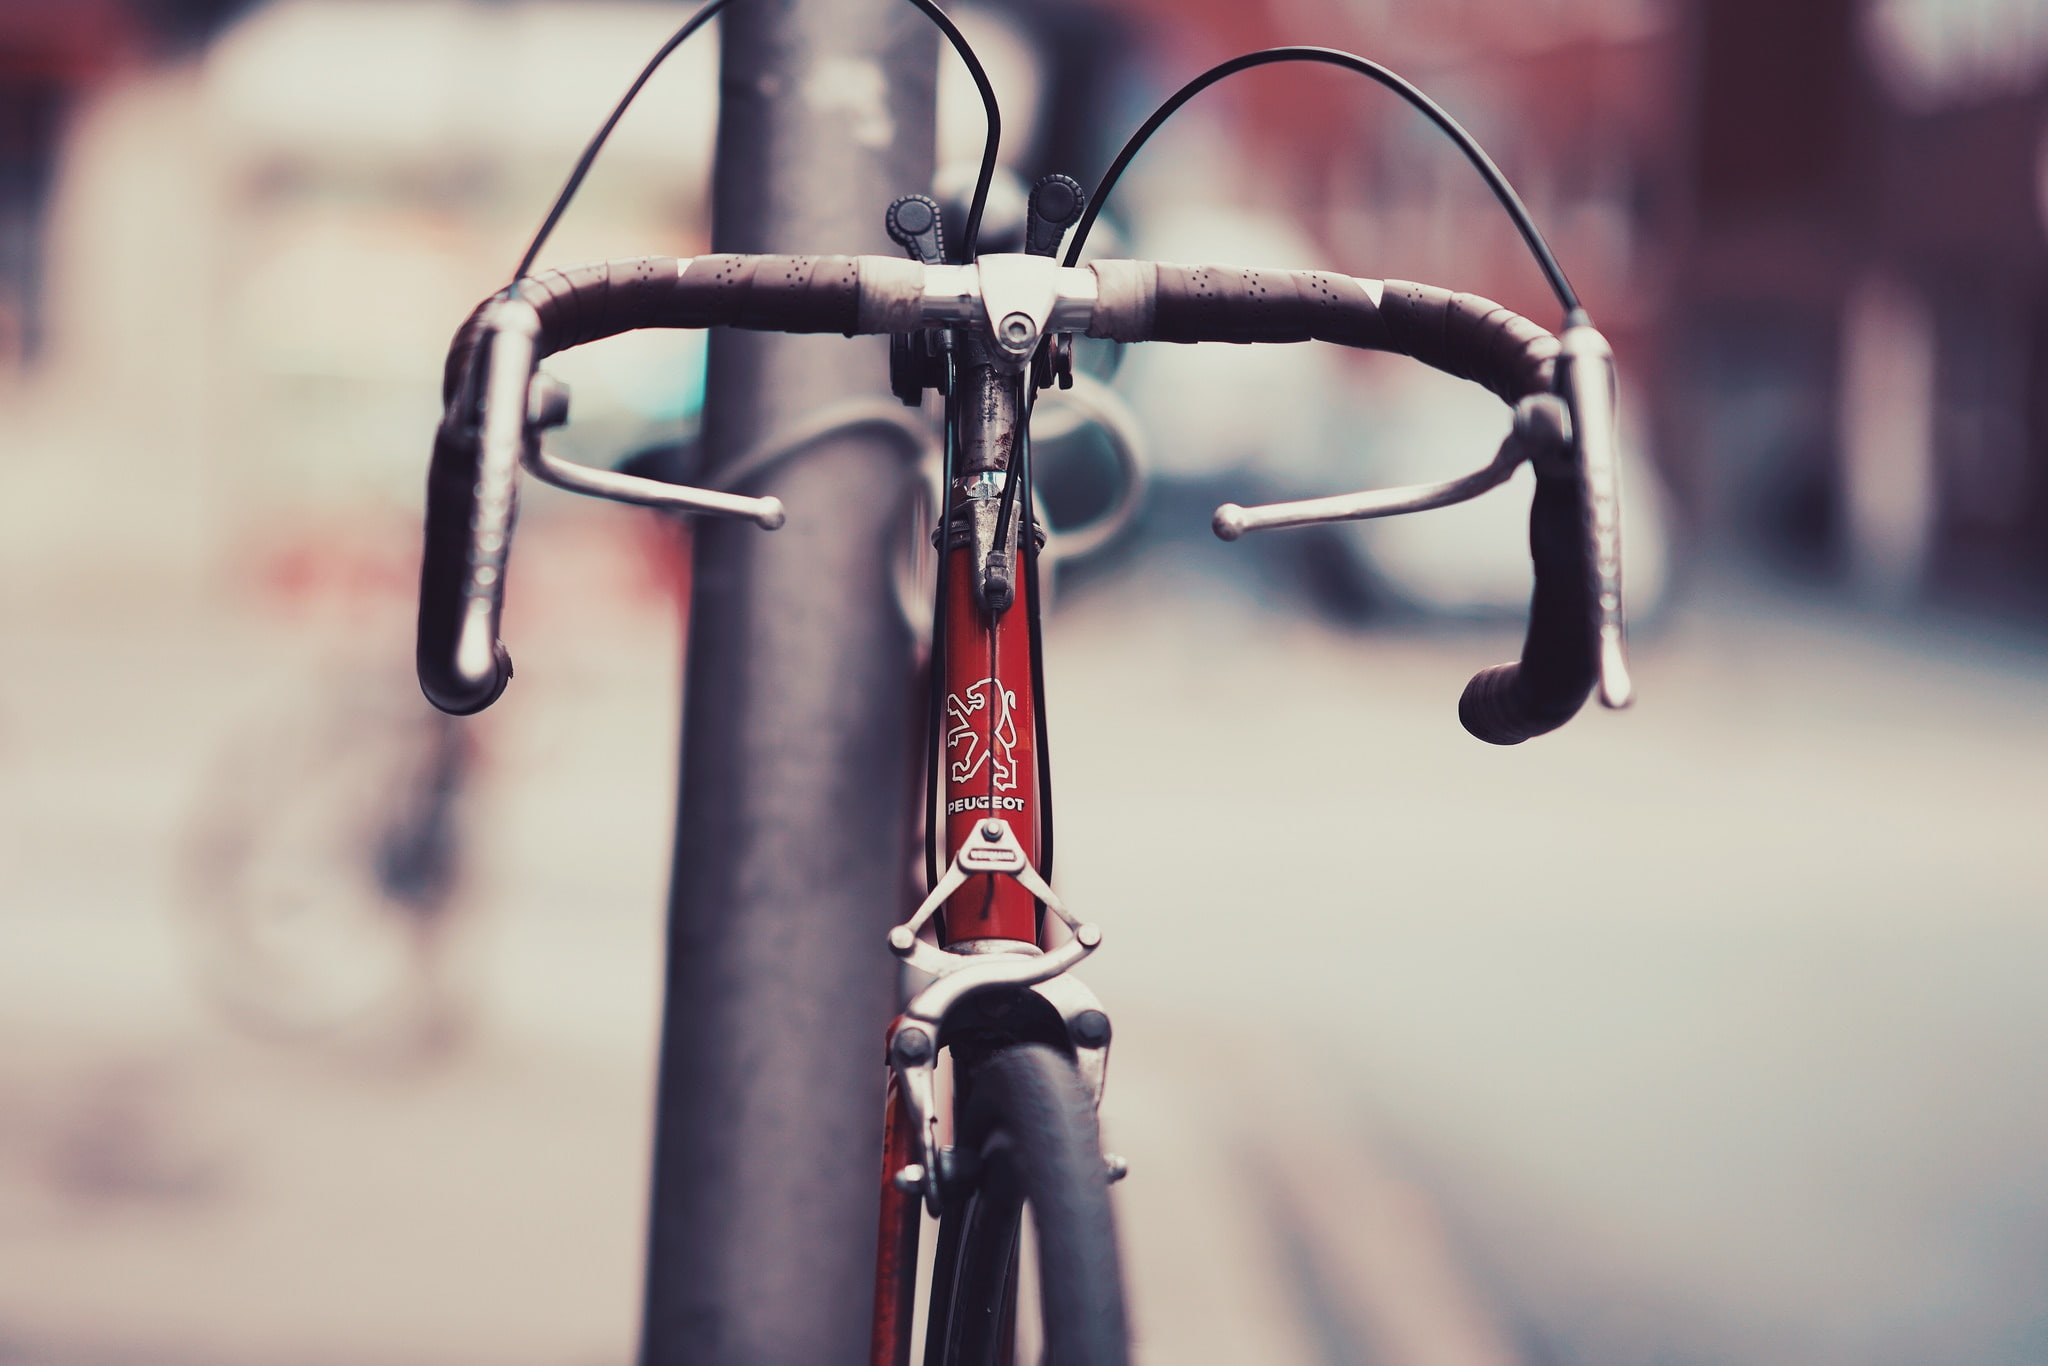 urban, city, depth of field, bicycle, vehicle, Peugeot, focus on foreground